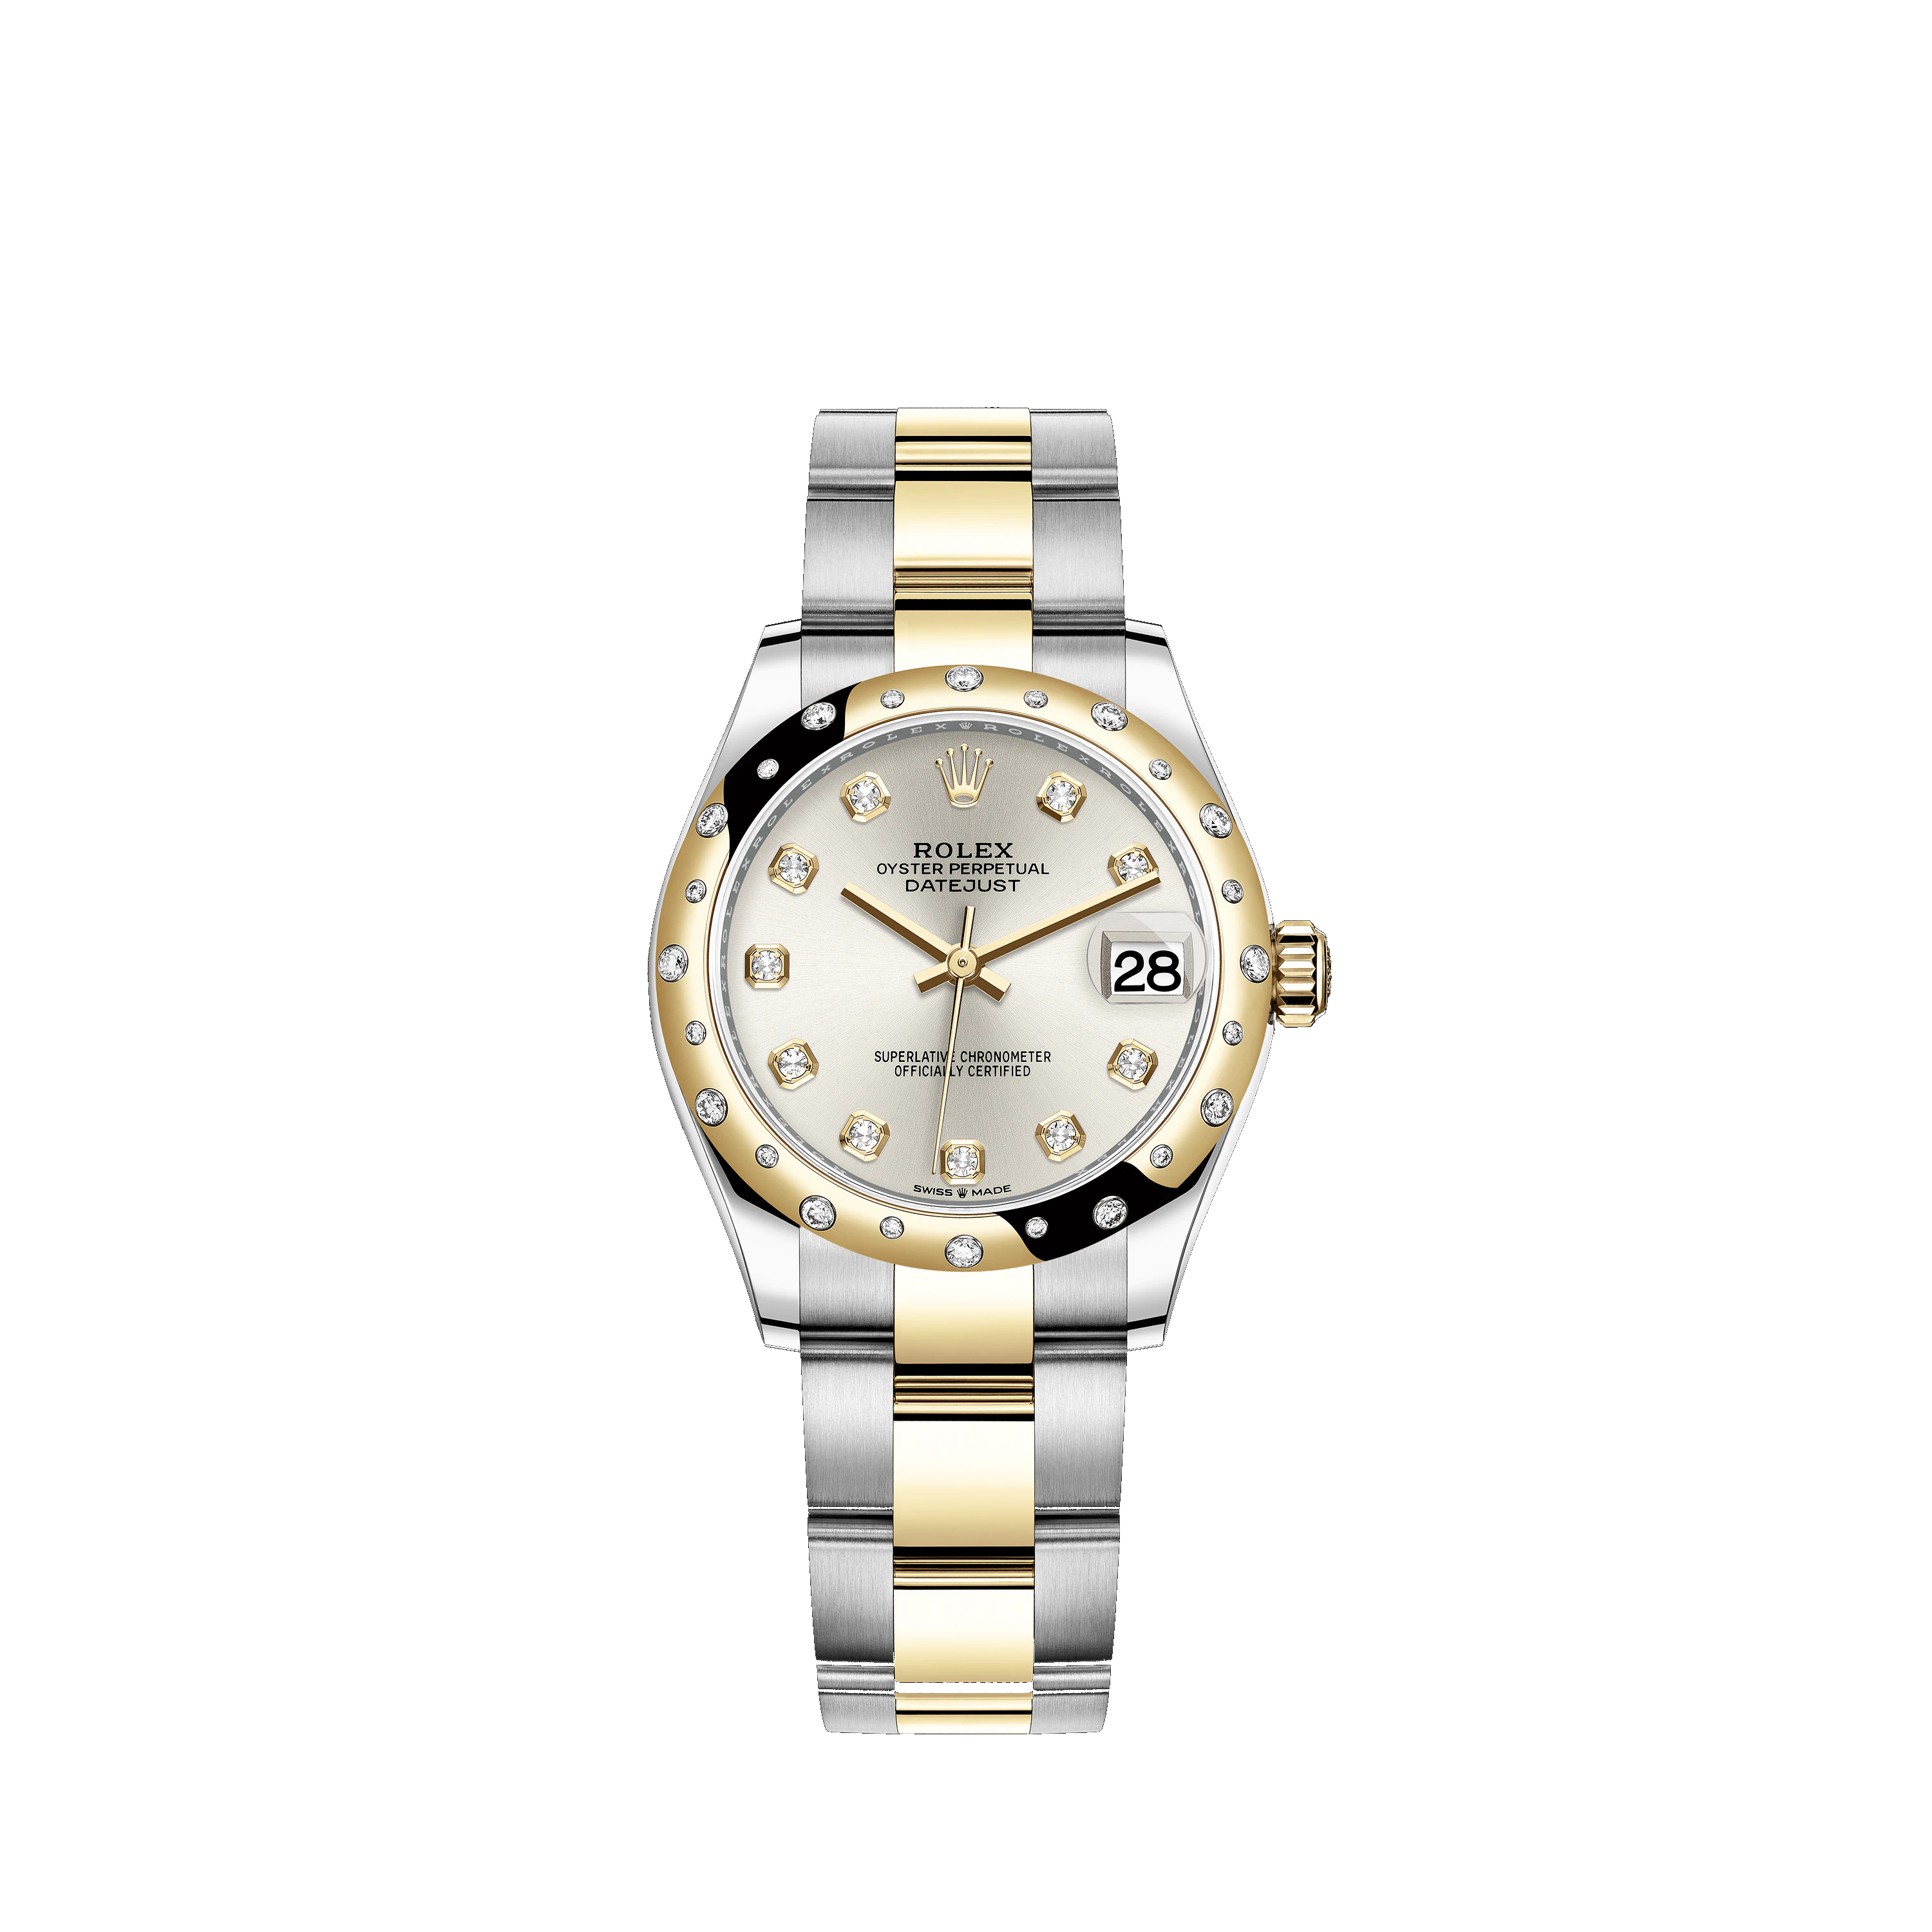 Datejust 31 278343RBR Gold & Stainless Steel Watch (Silver Set with Diamonds)